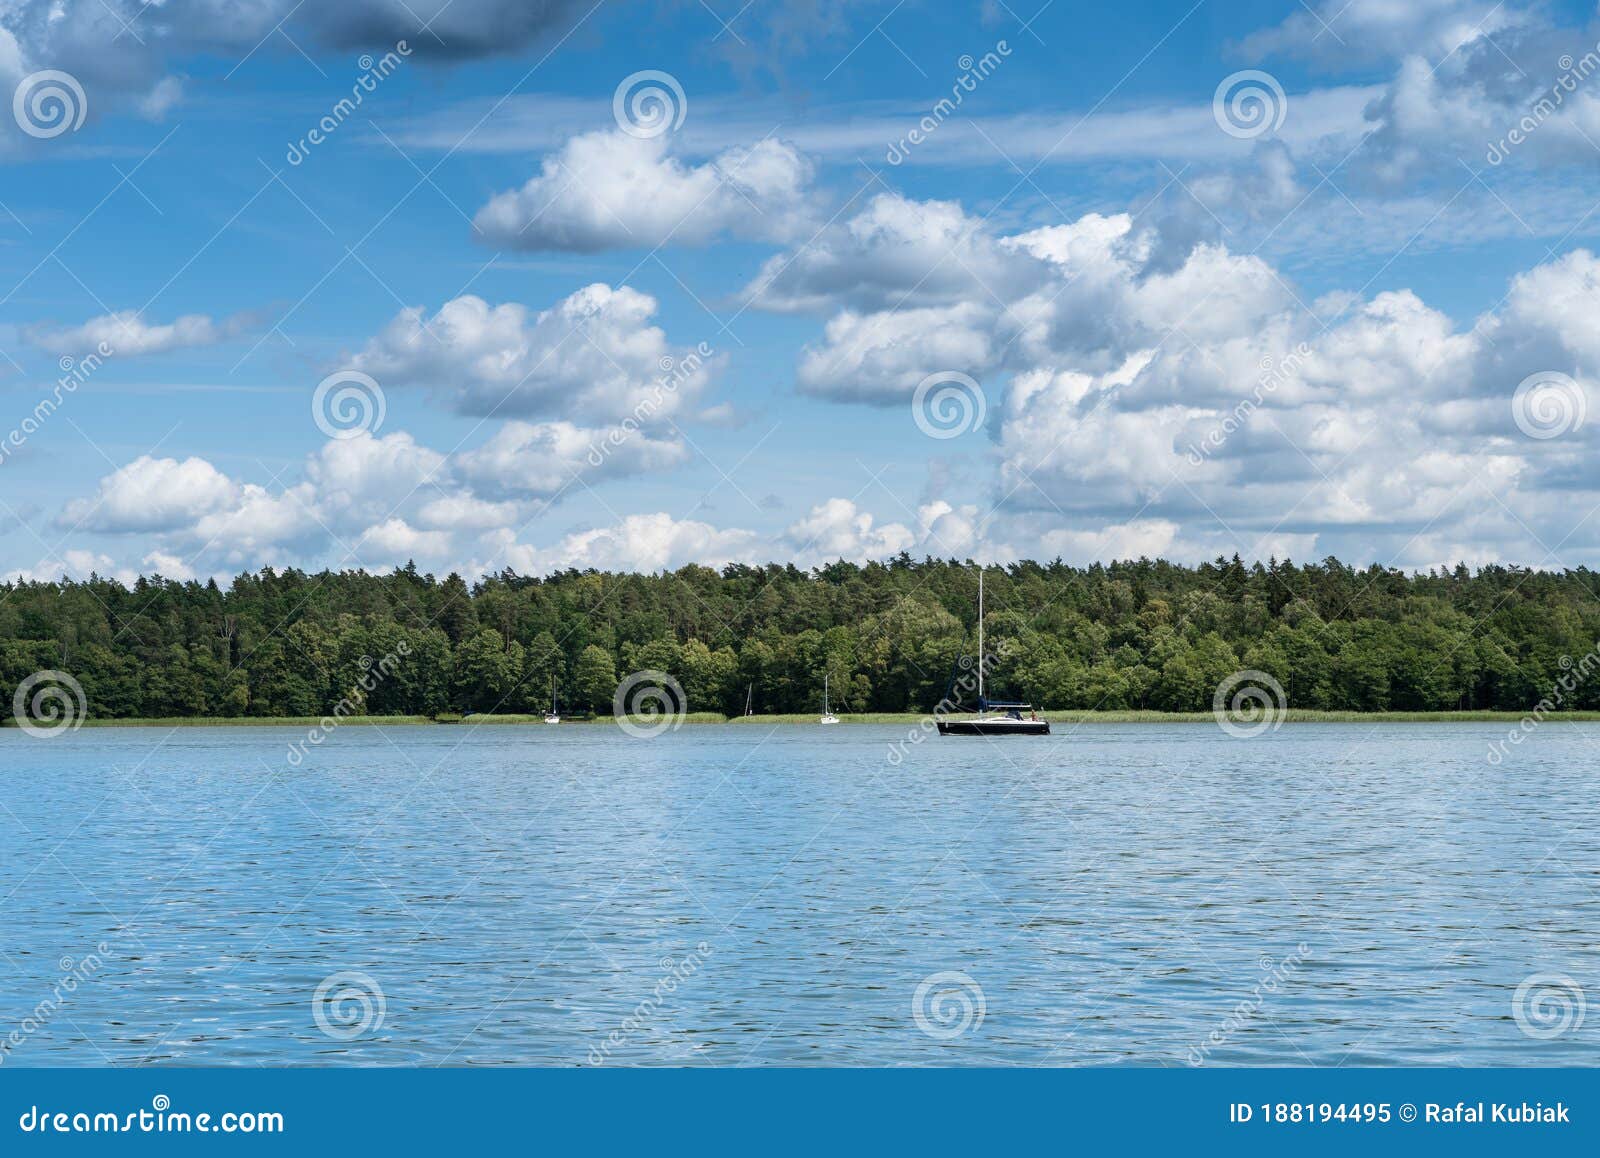 mazury lakes view with sailing boat at midday